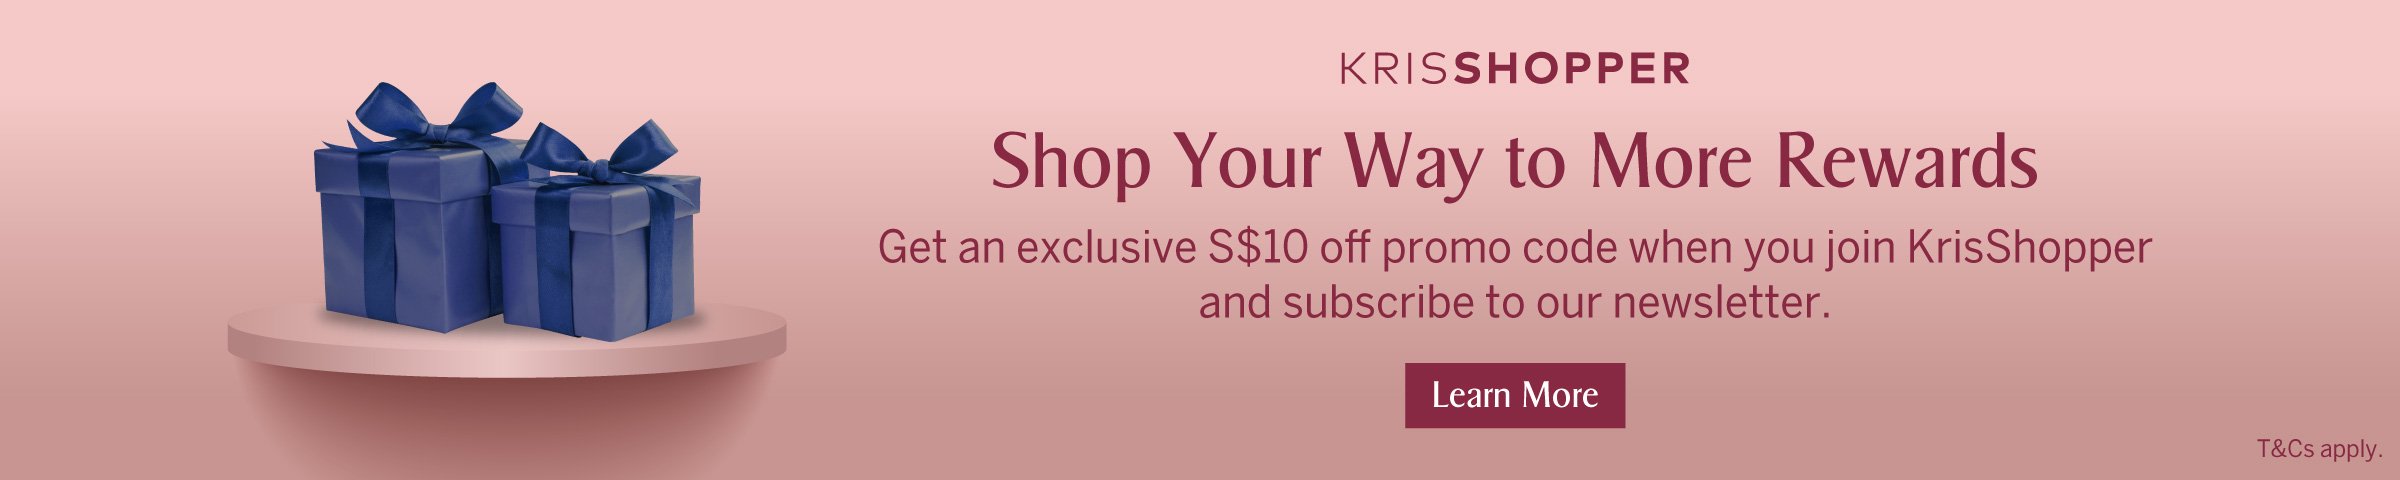 Earn up to 4 miles and enjoy exclusive access with KrisShopper